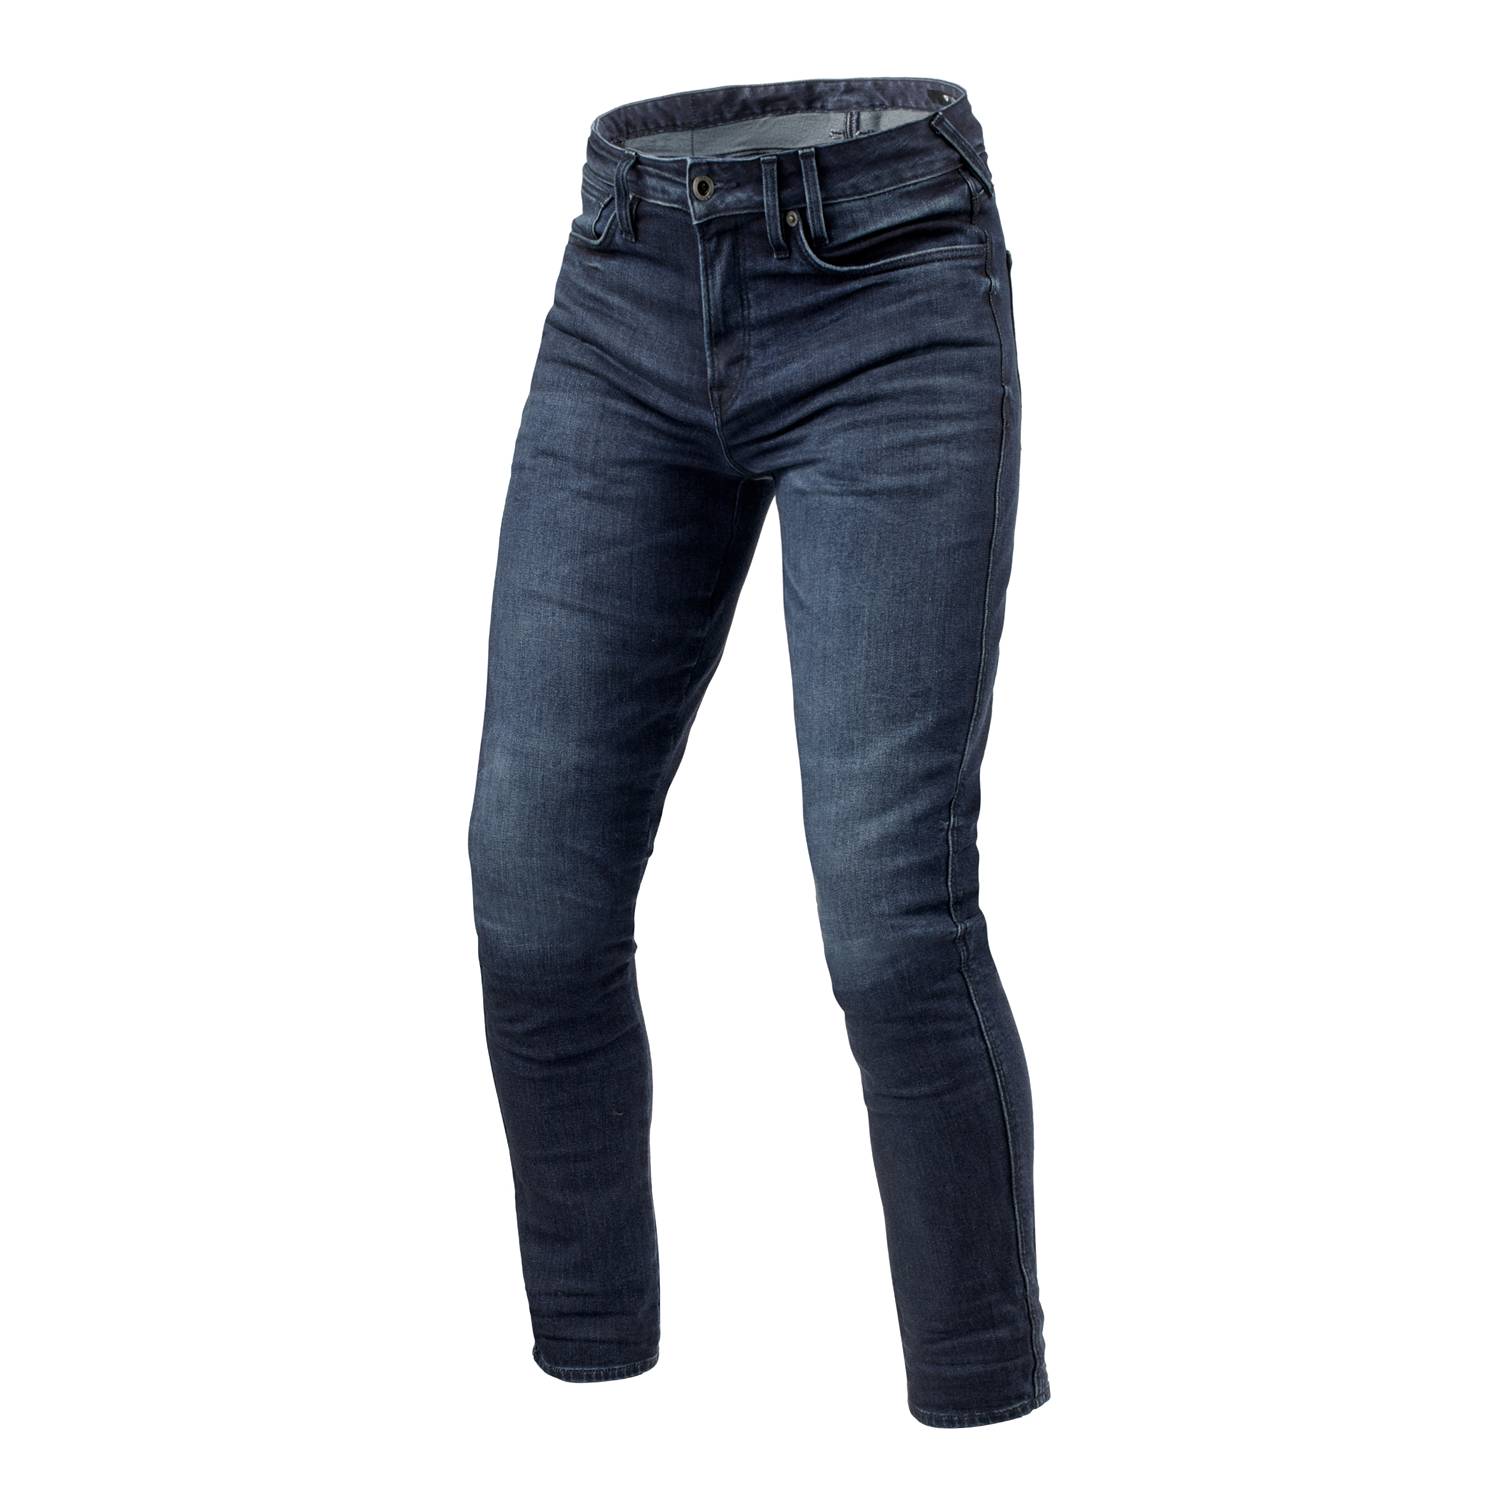 Image of REV'IT! Jeans Carlin SK Dark Blue Used L36 Motorcycle Jeans Taille L36/W30